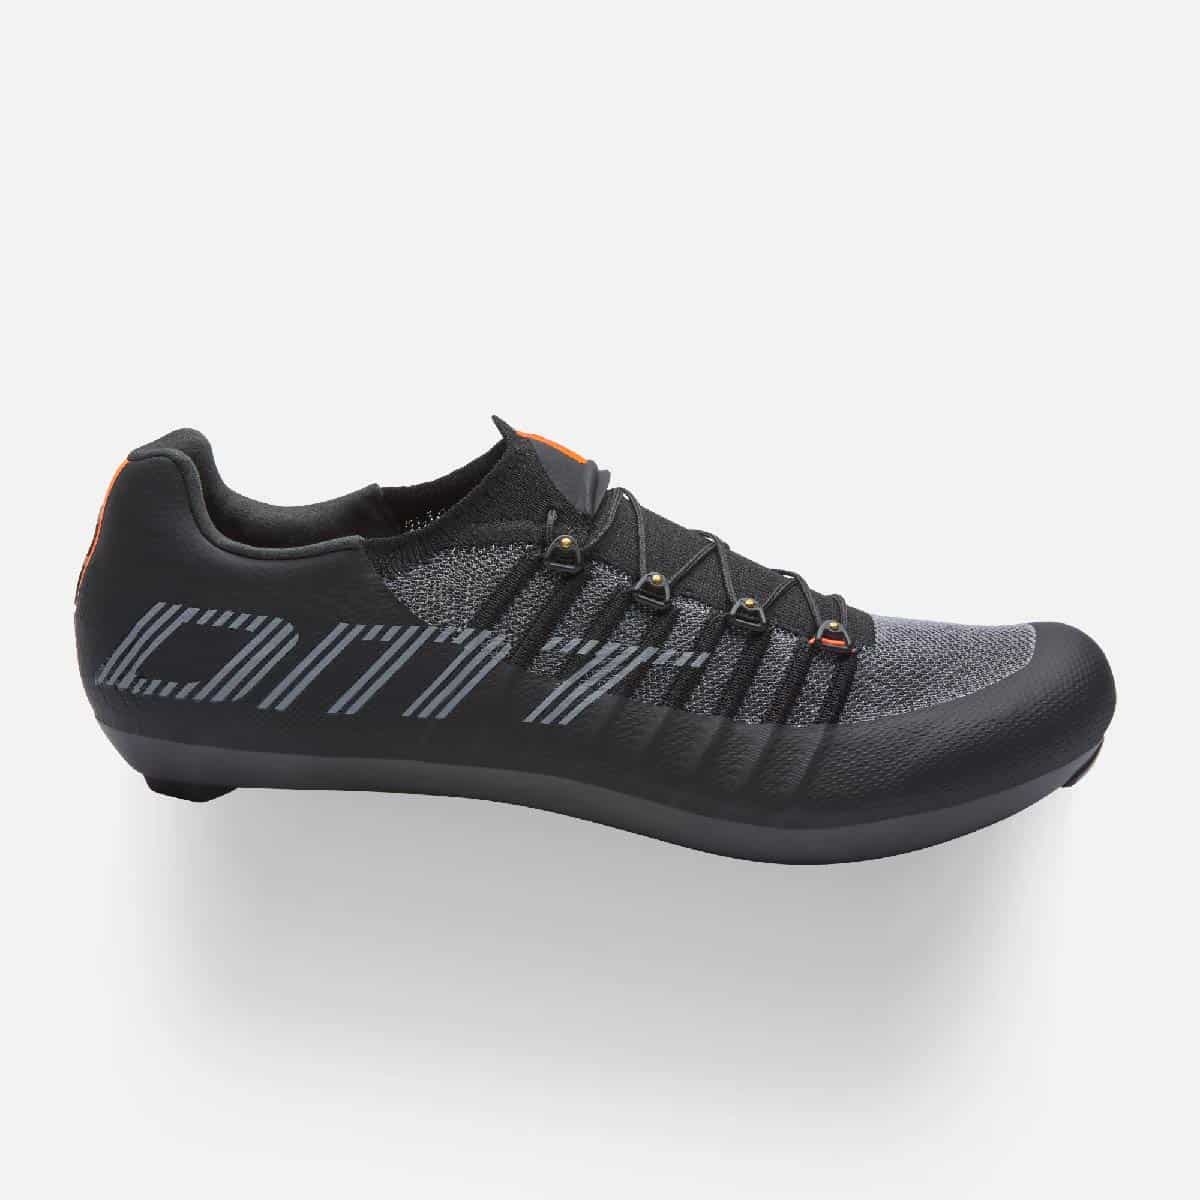 DMT Pogi's Road Shoes black/grey right side